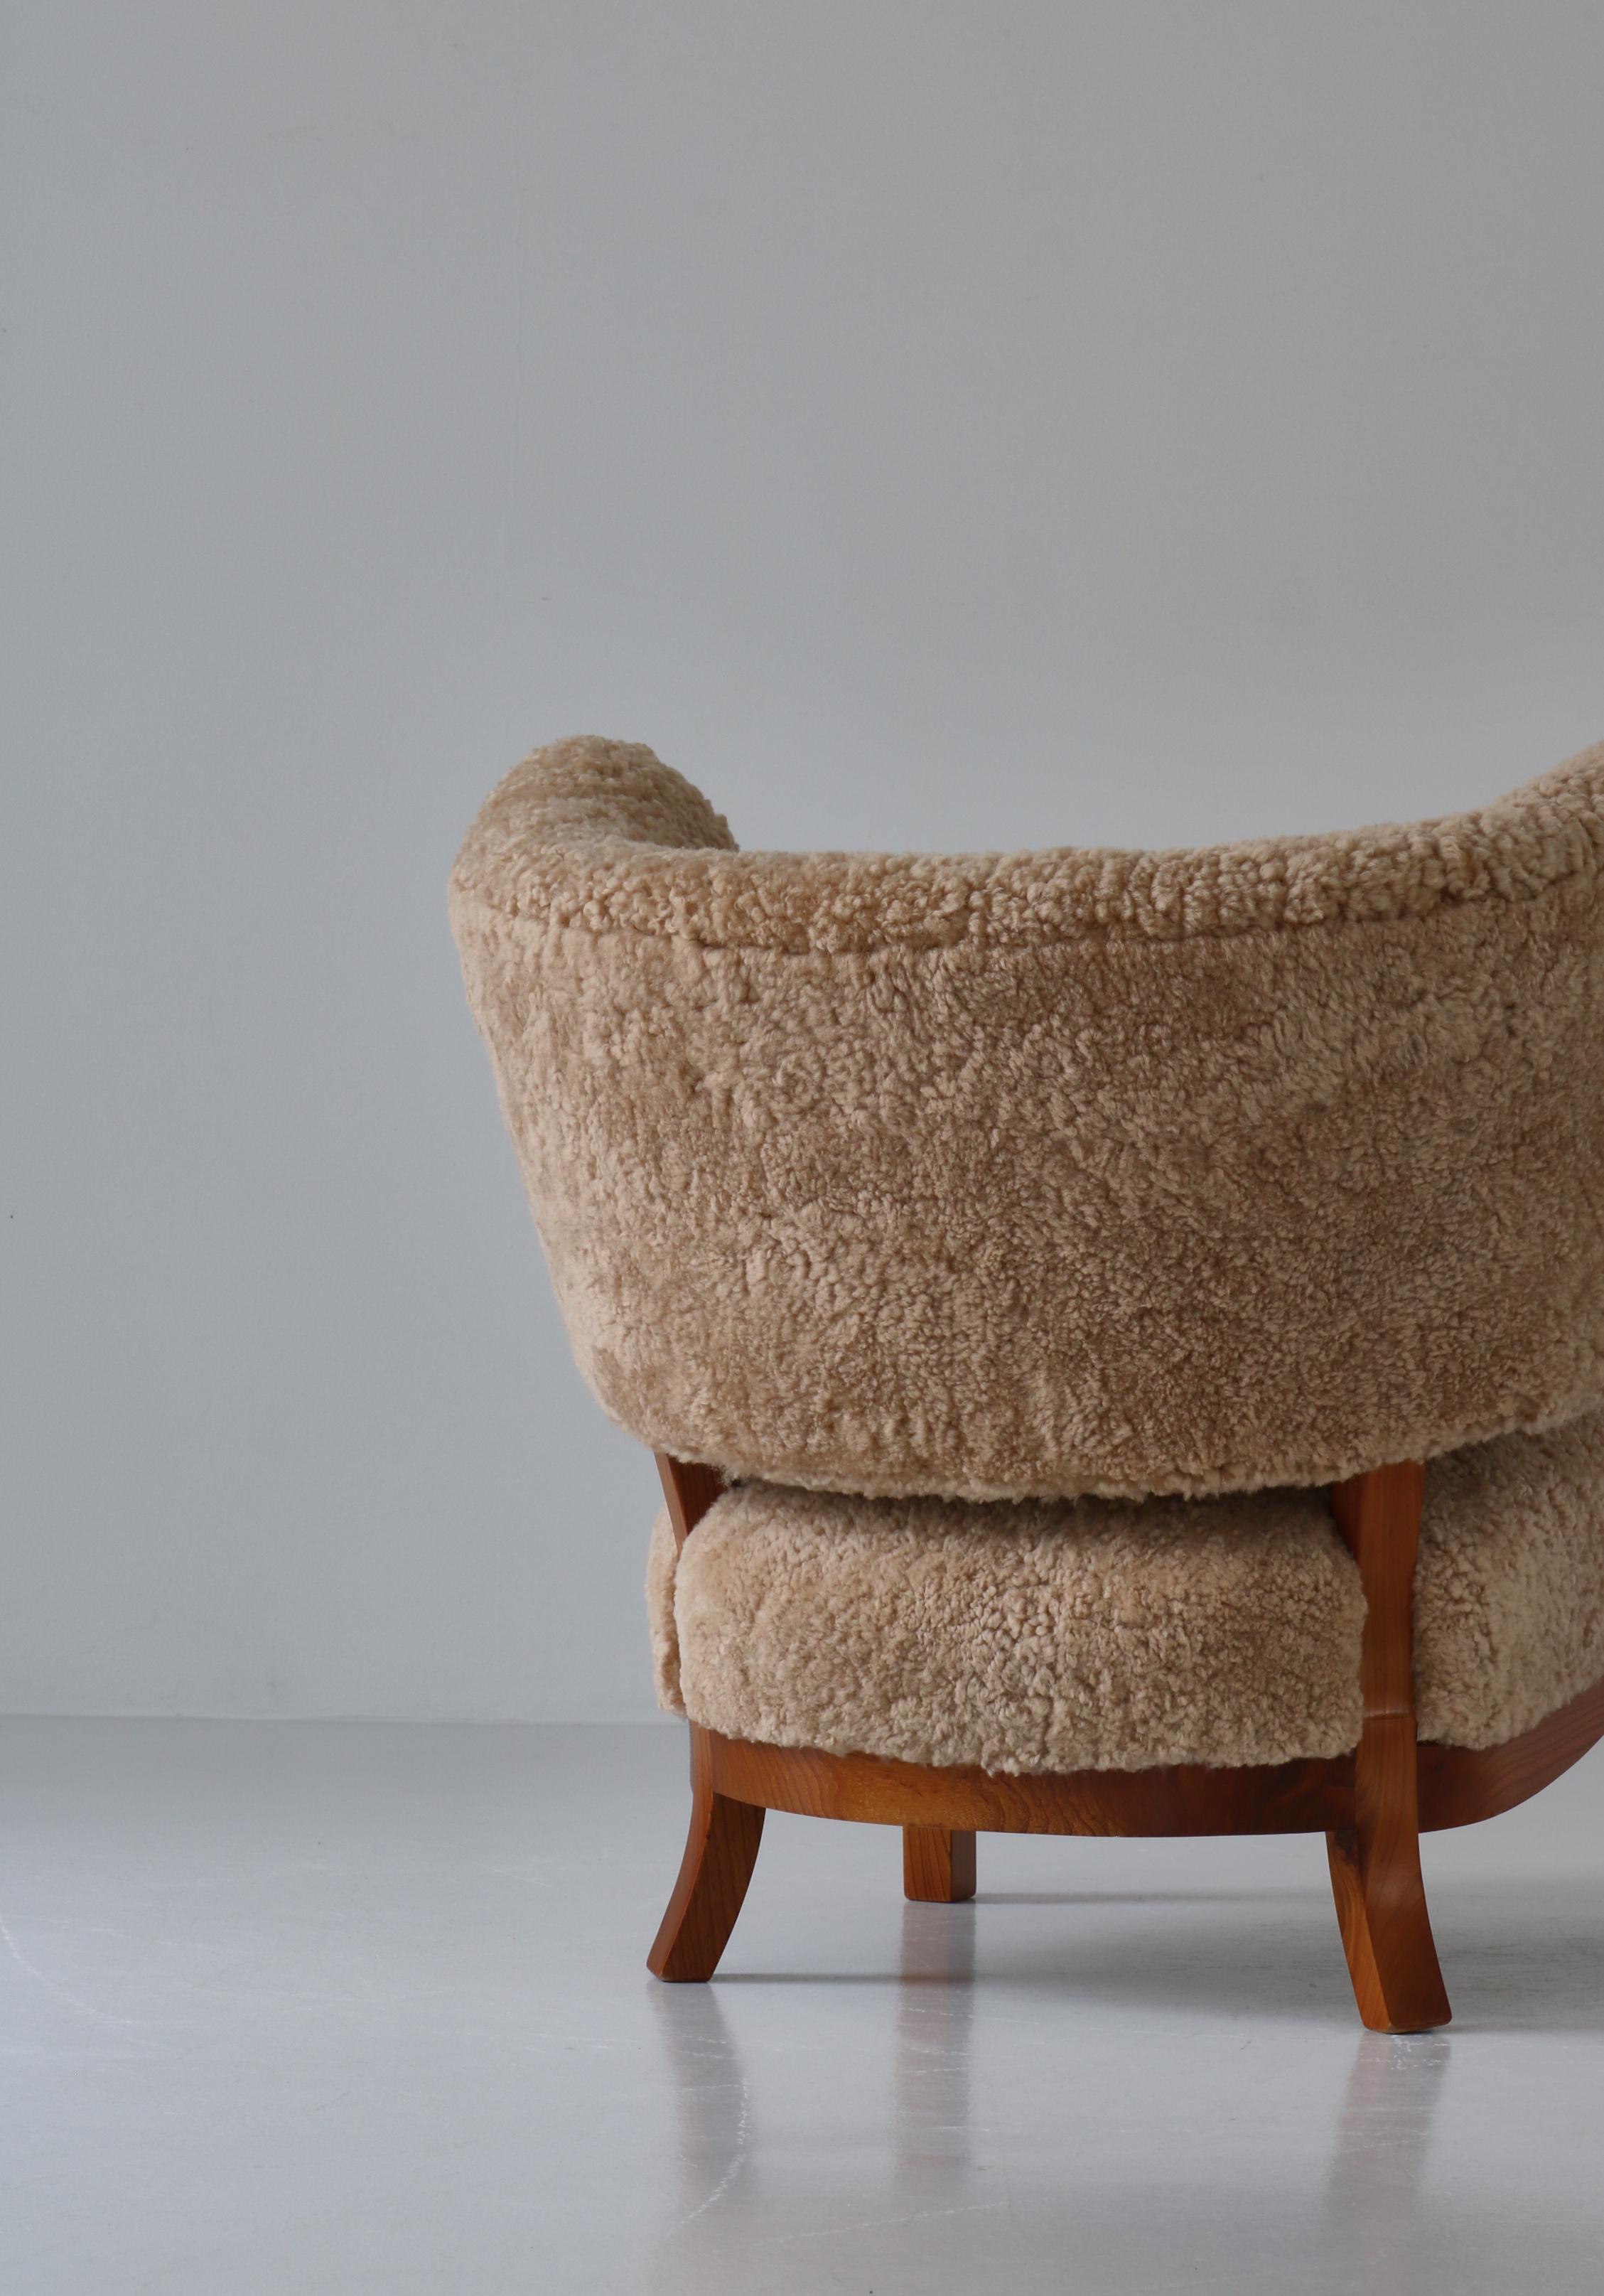 1930s Lounge Chair in Sheepskin, Otto Schulz for Boet, Scandinavian Modern In Good Condition For Sale In Odense, DK